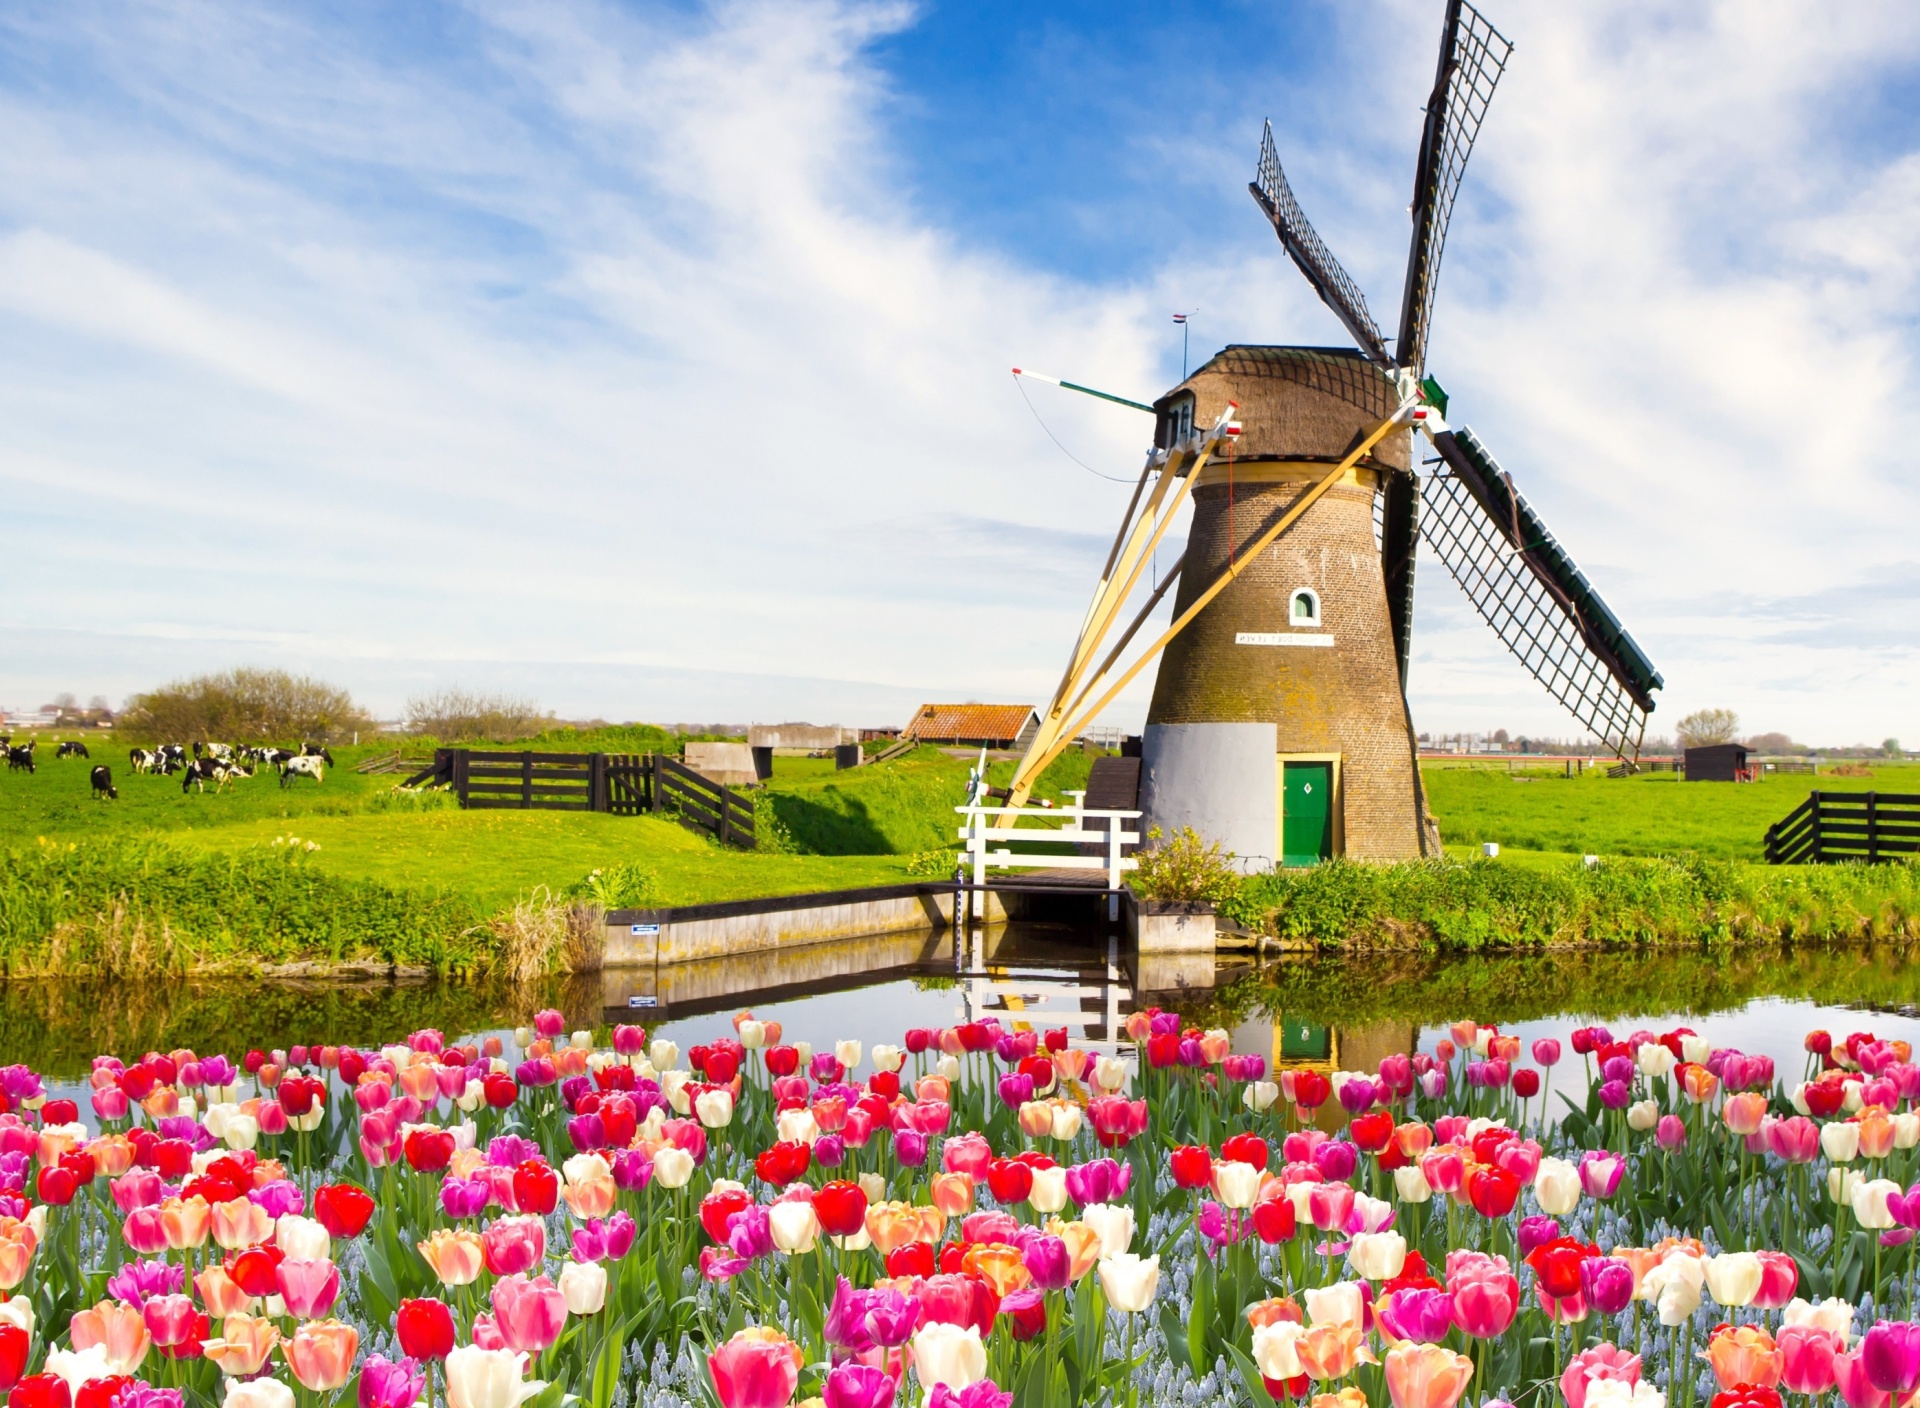 Mill and tulips in Holland screenshot #1 1920x1408